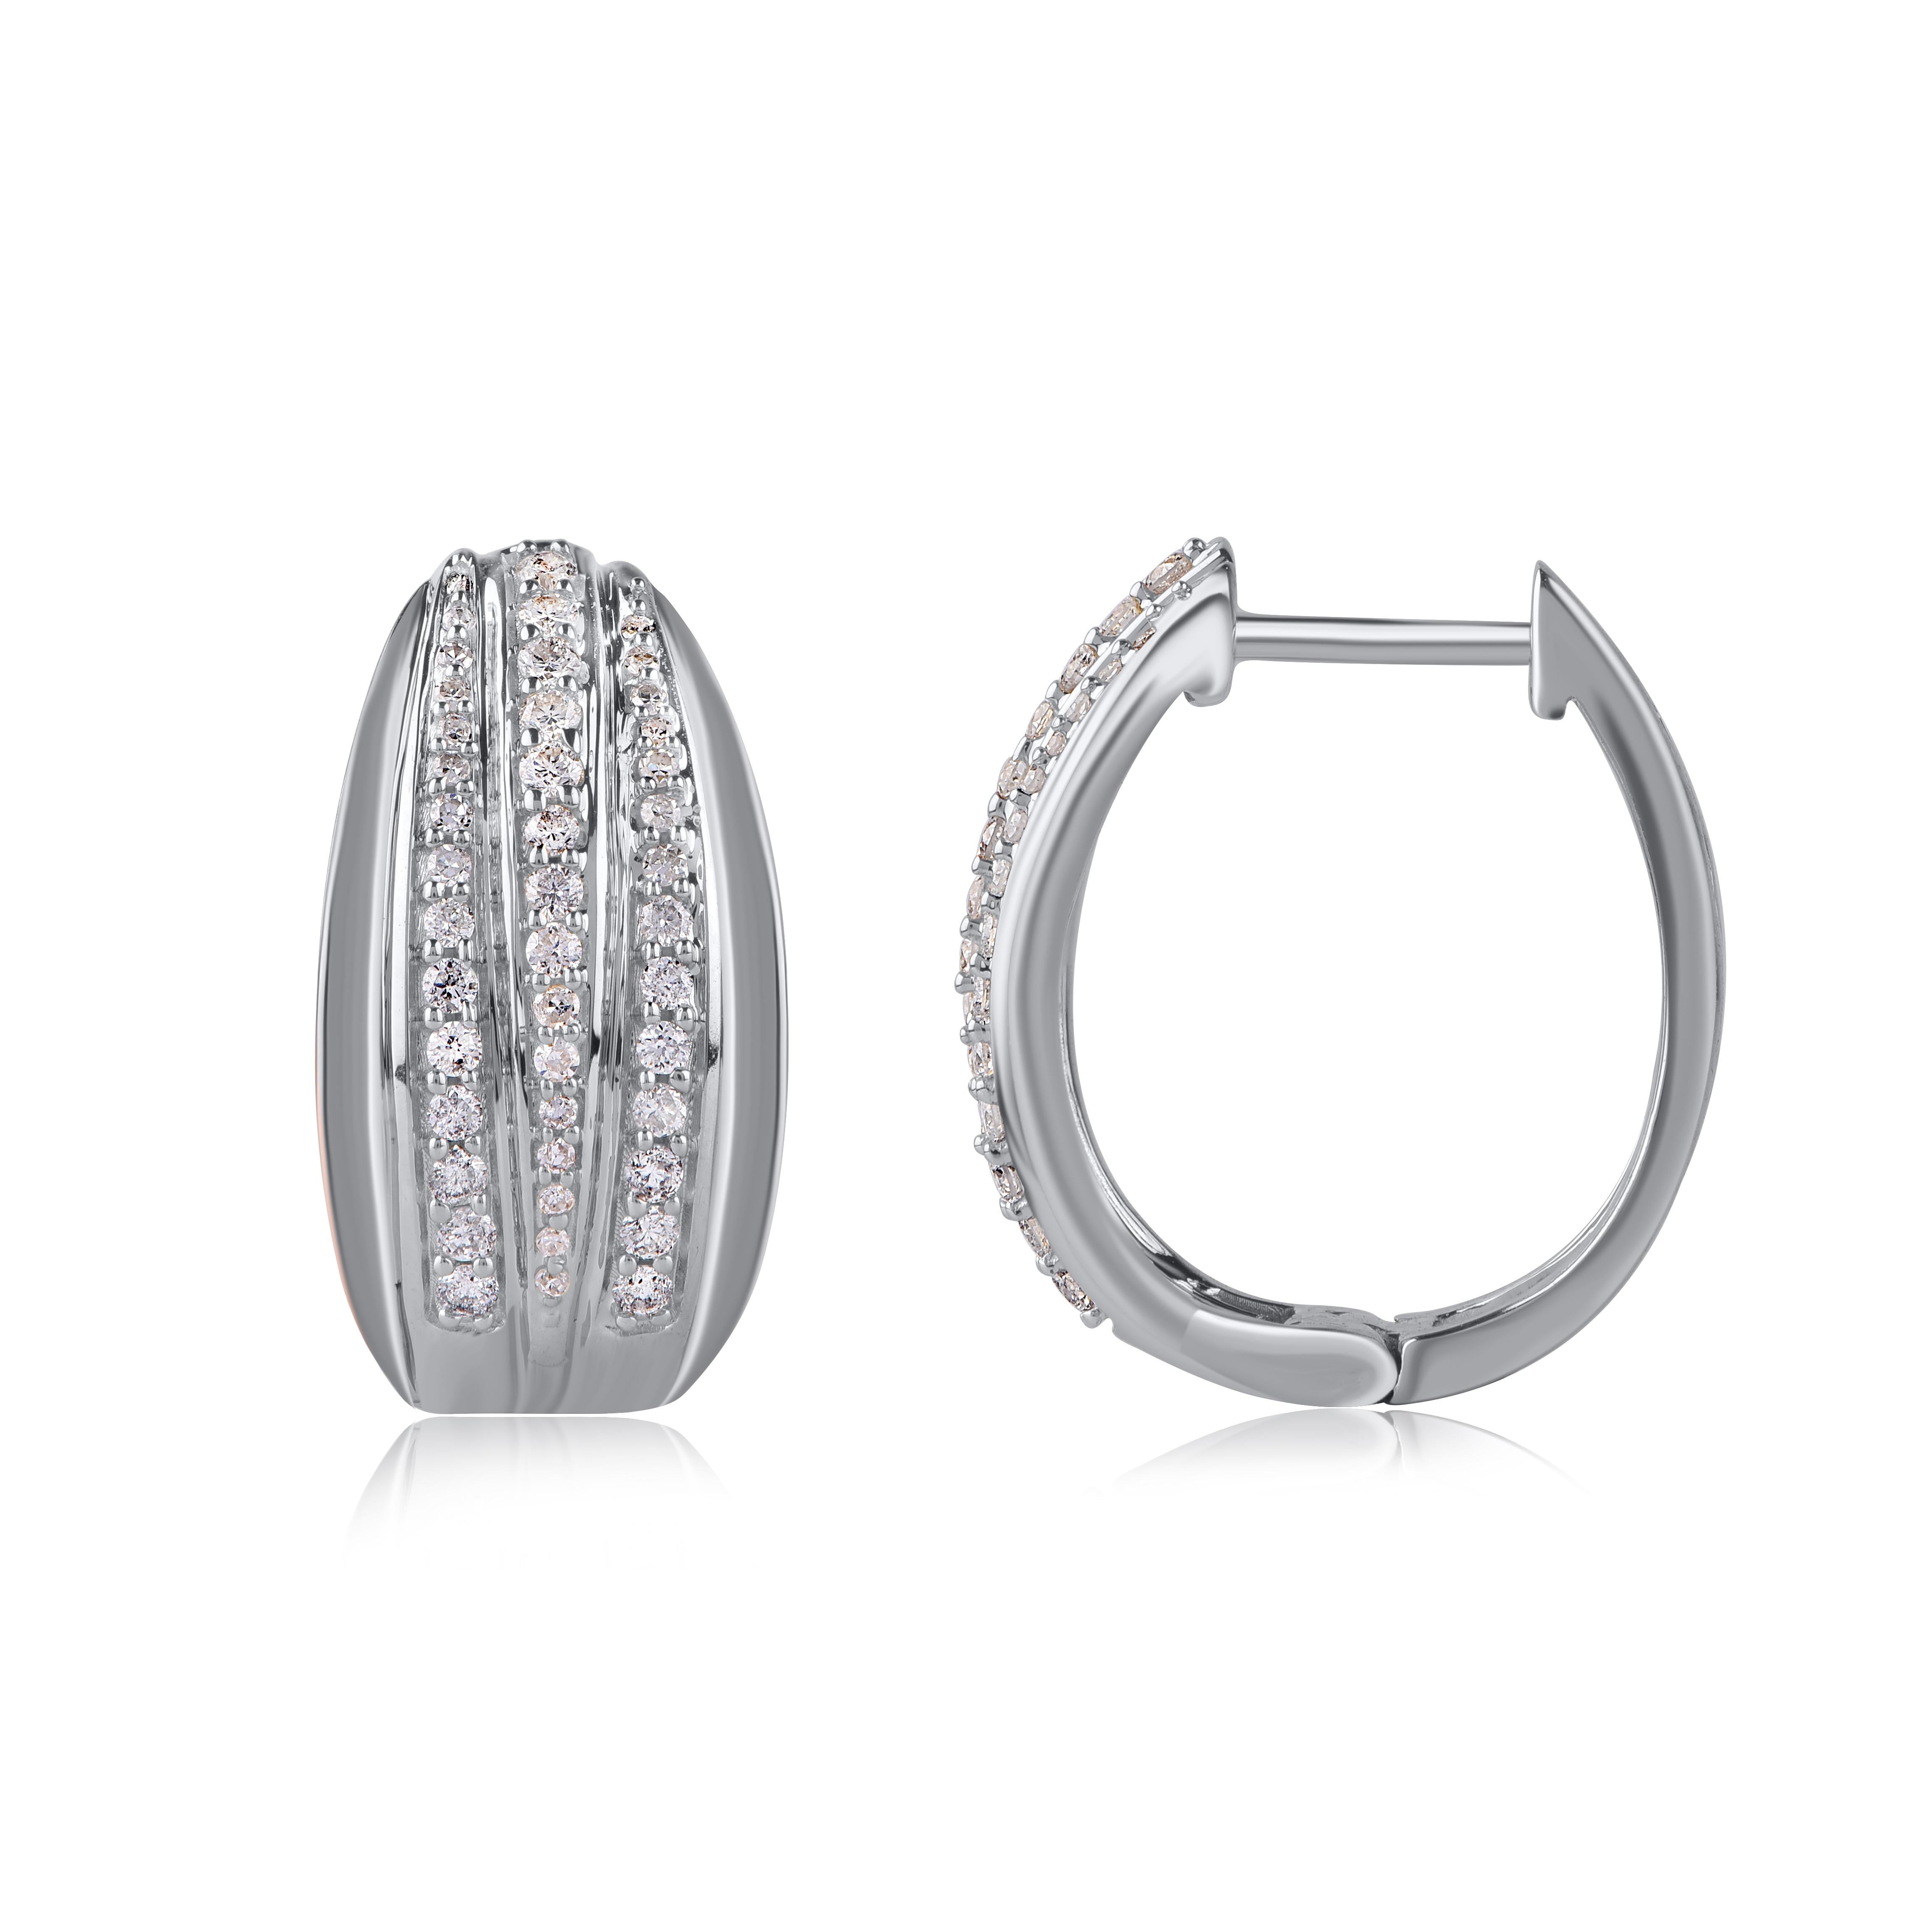 A sparkling delight, these diamond hoop earrings fit her charming aesthetic. Embellished with 86 round single cut and brilliant cut diamond set in pave setting, and dazzles with H-I color I2 clarity. Captivating with 0.50 Carat and crafted by our